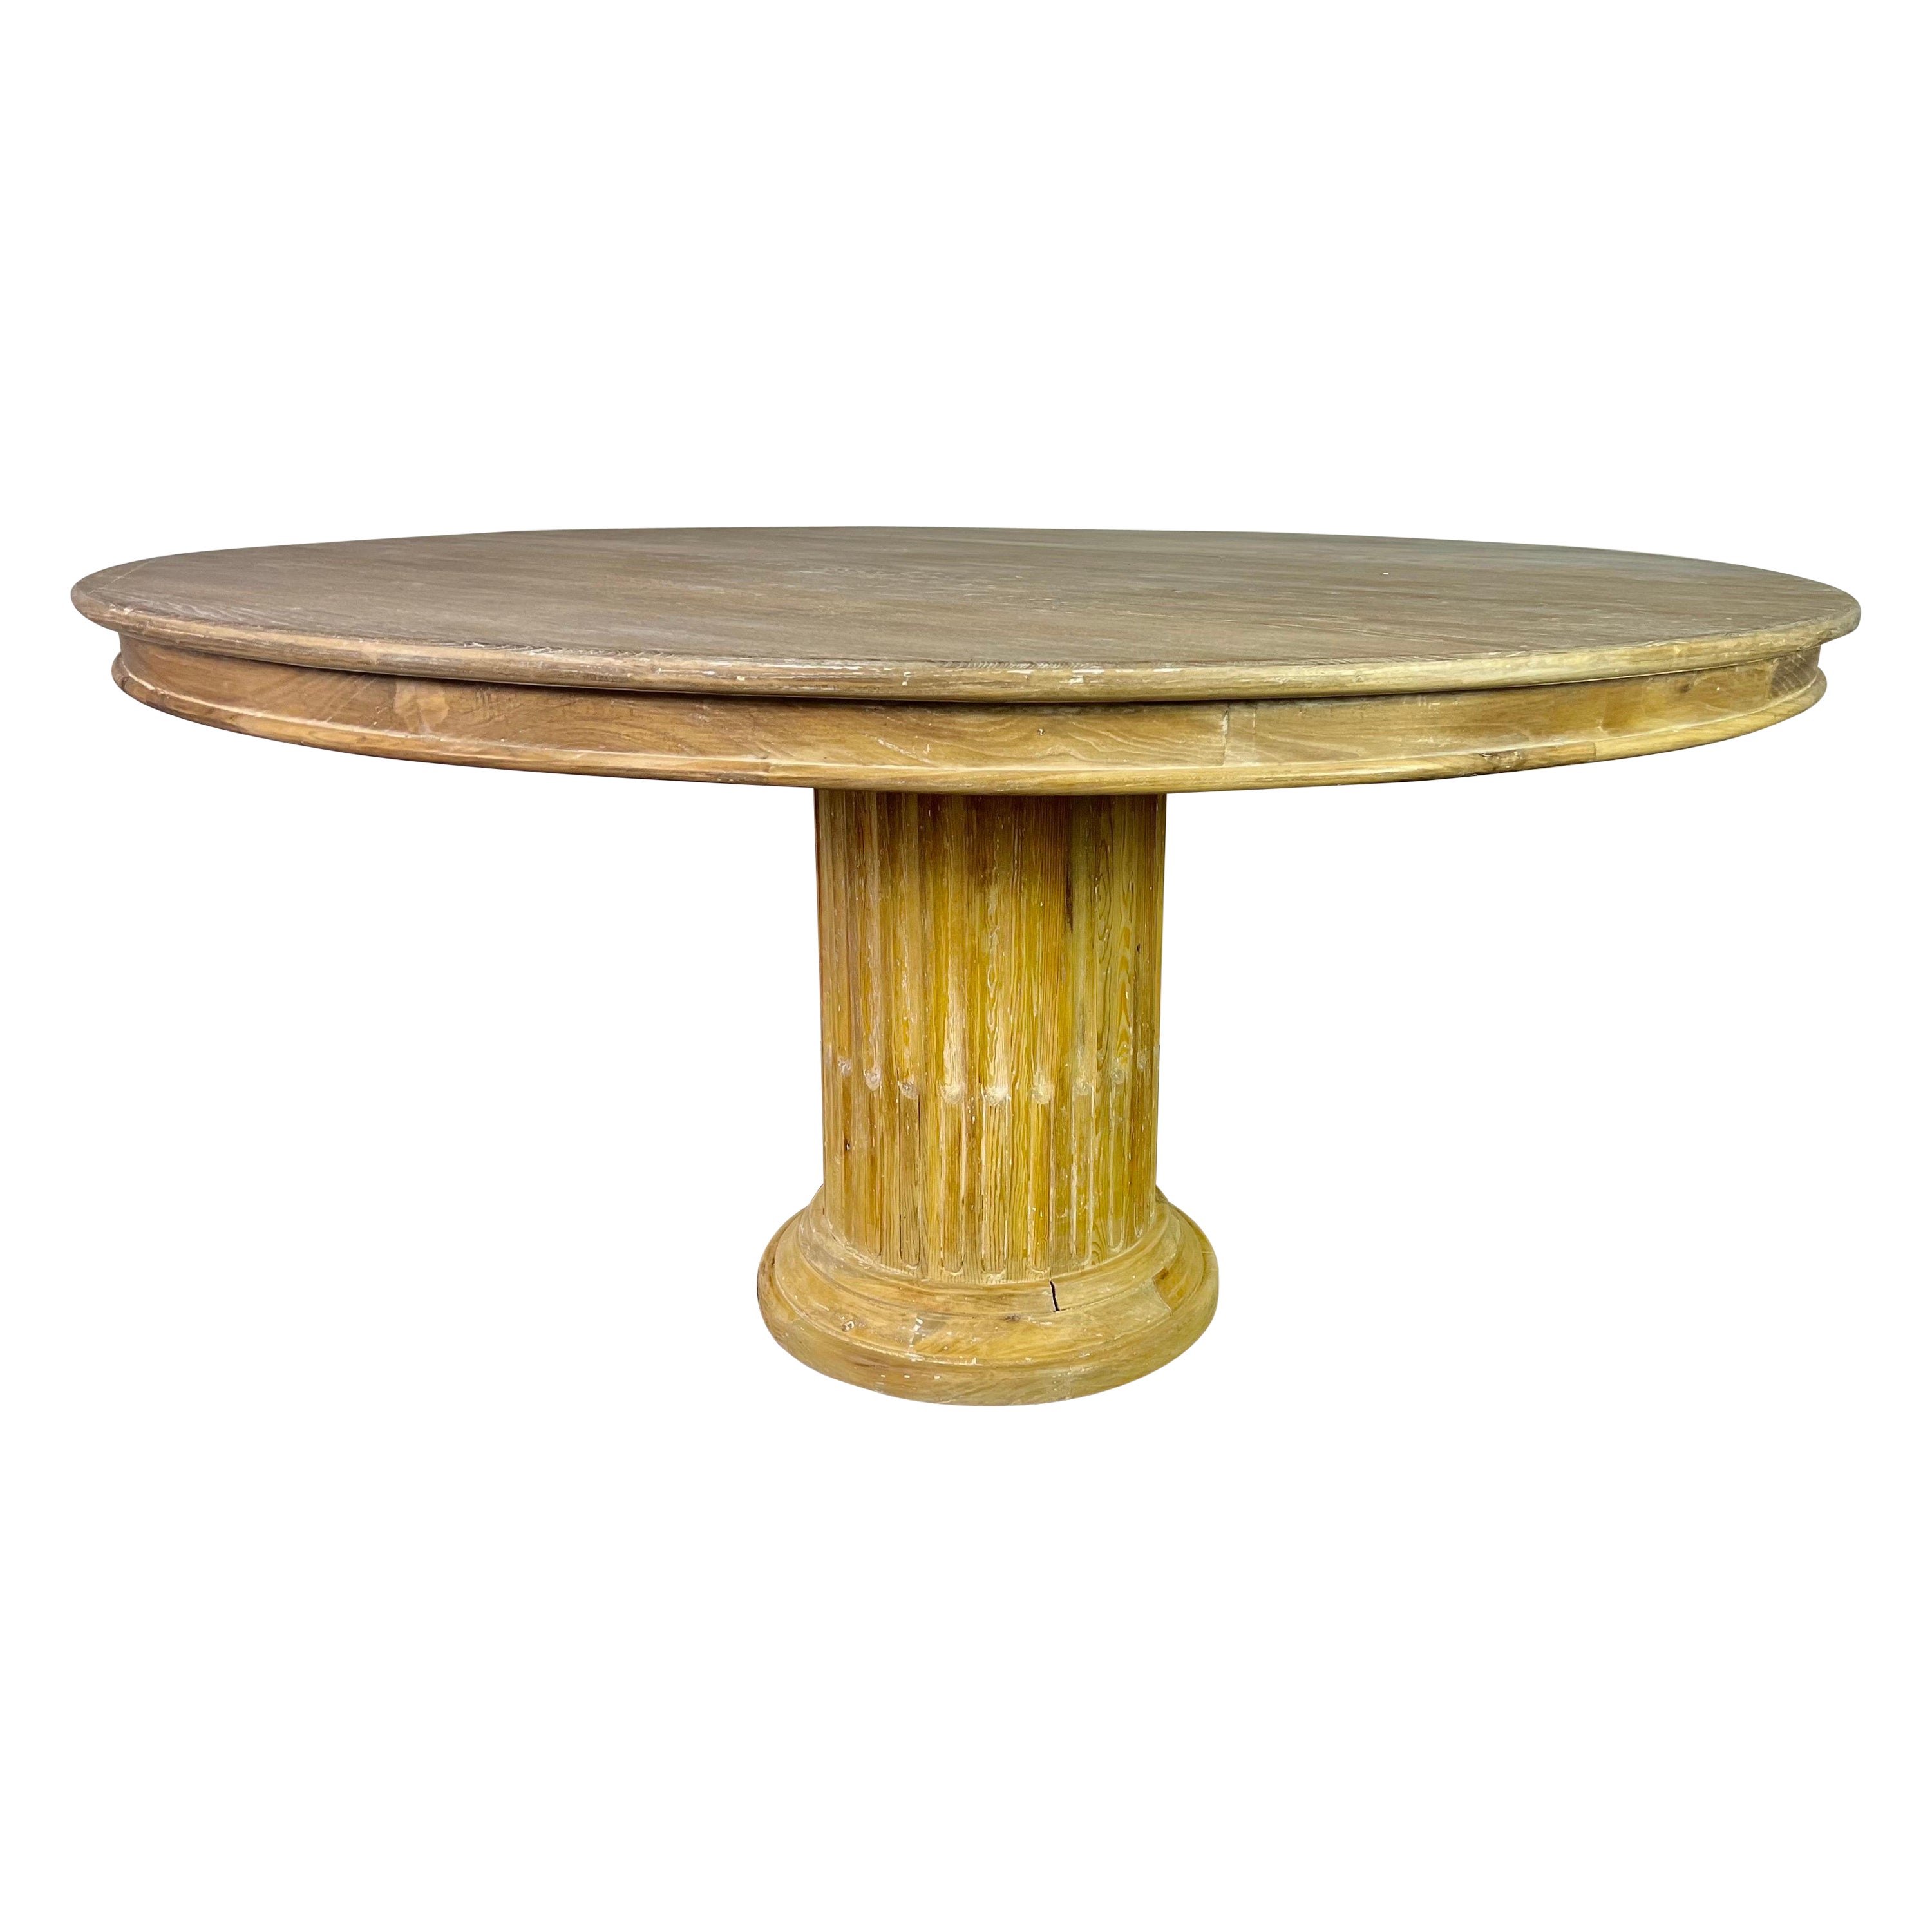 1930s Italian Neoclassical Style Dining Table For Sale